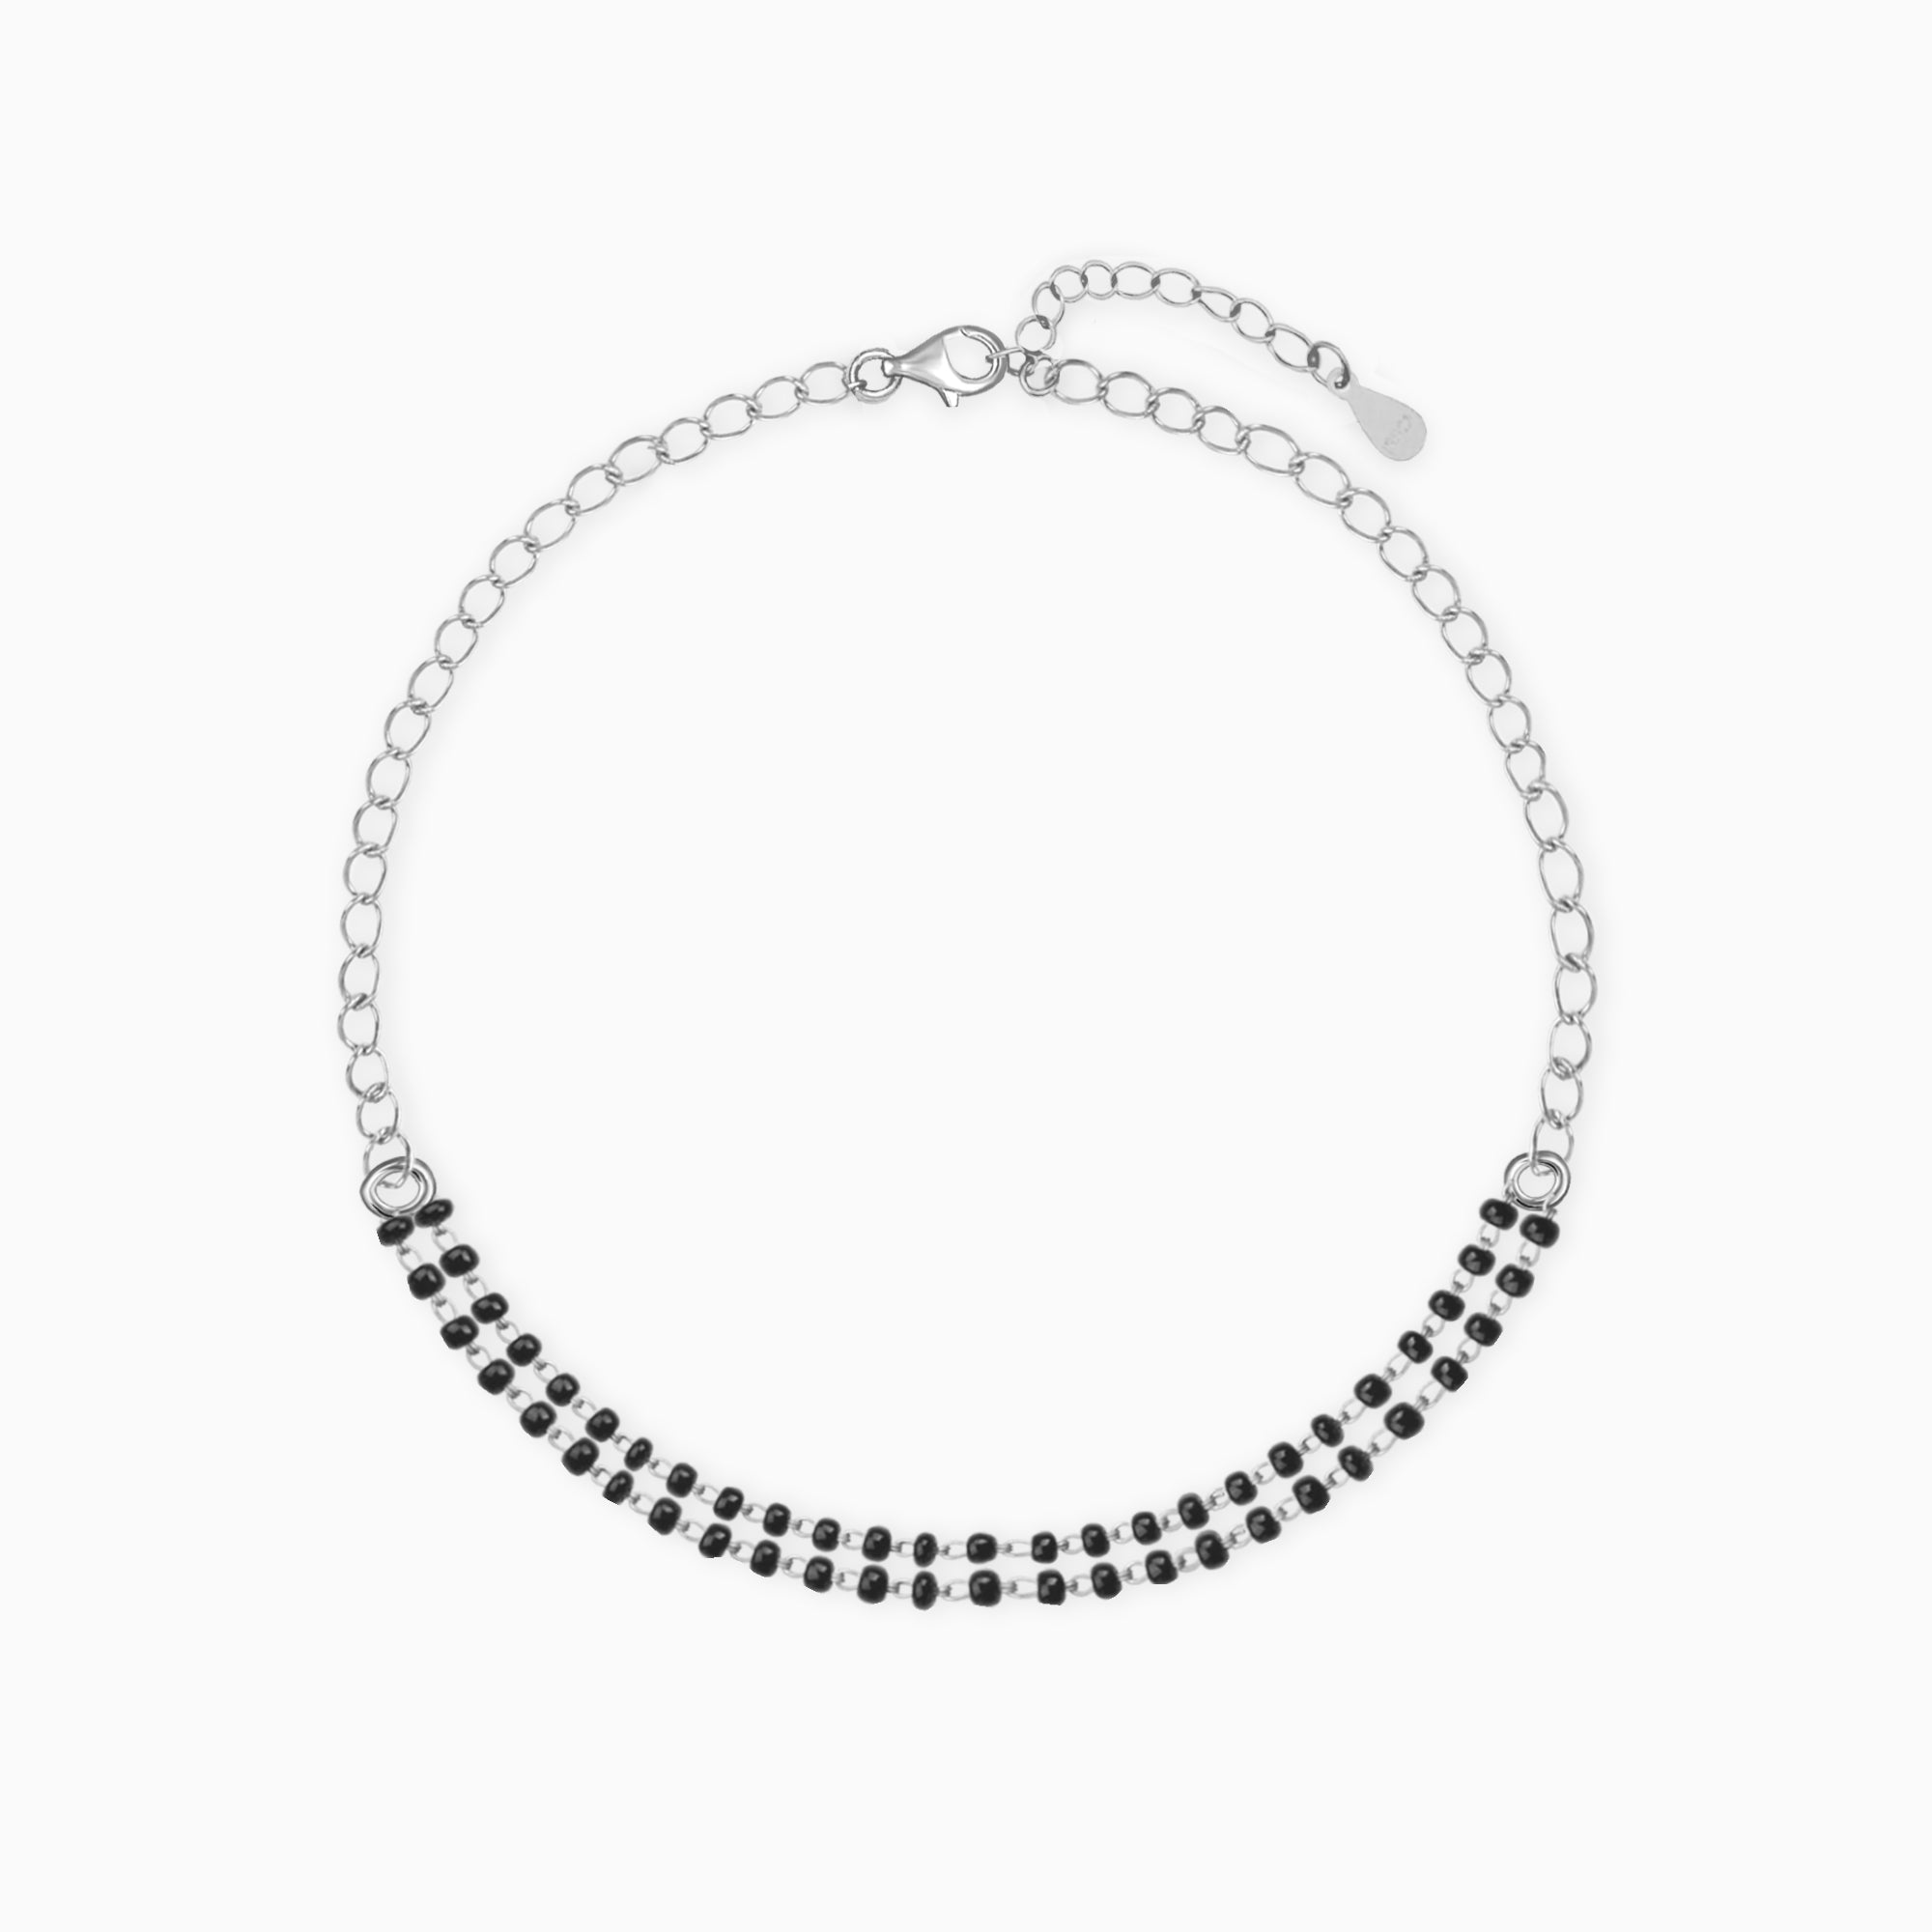 Layered Black and Silver Plated Contemporary Bracelet – www.pipabella.com